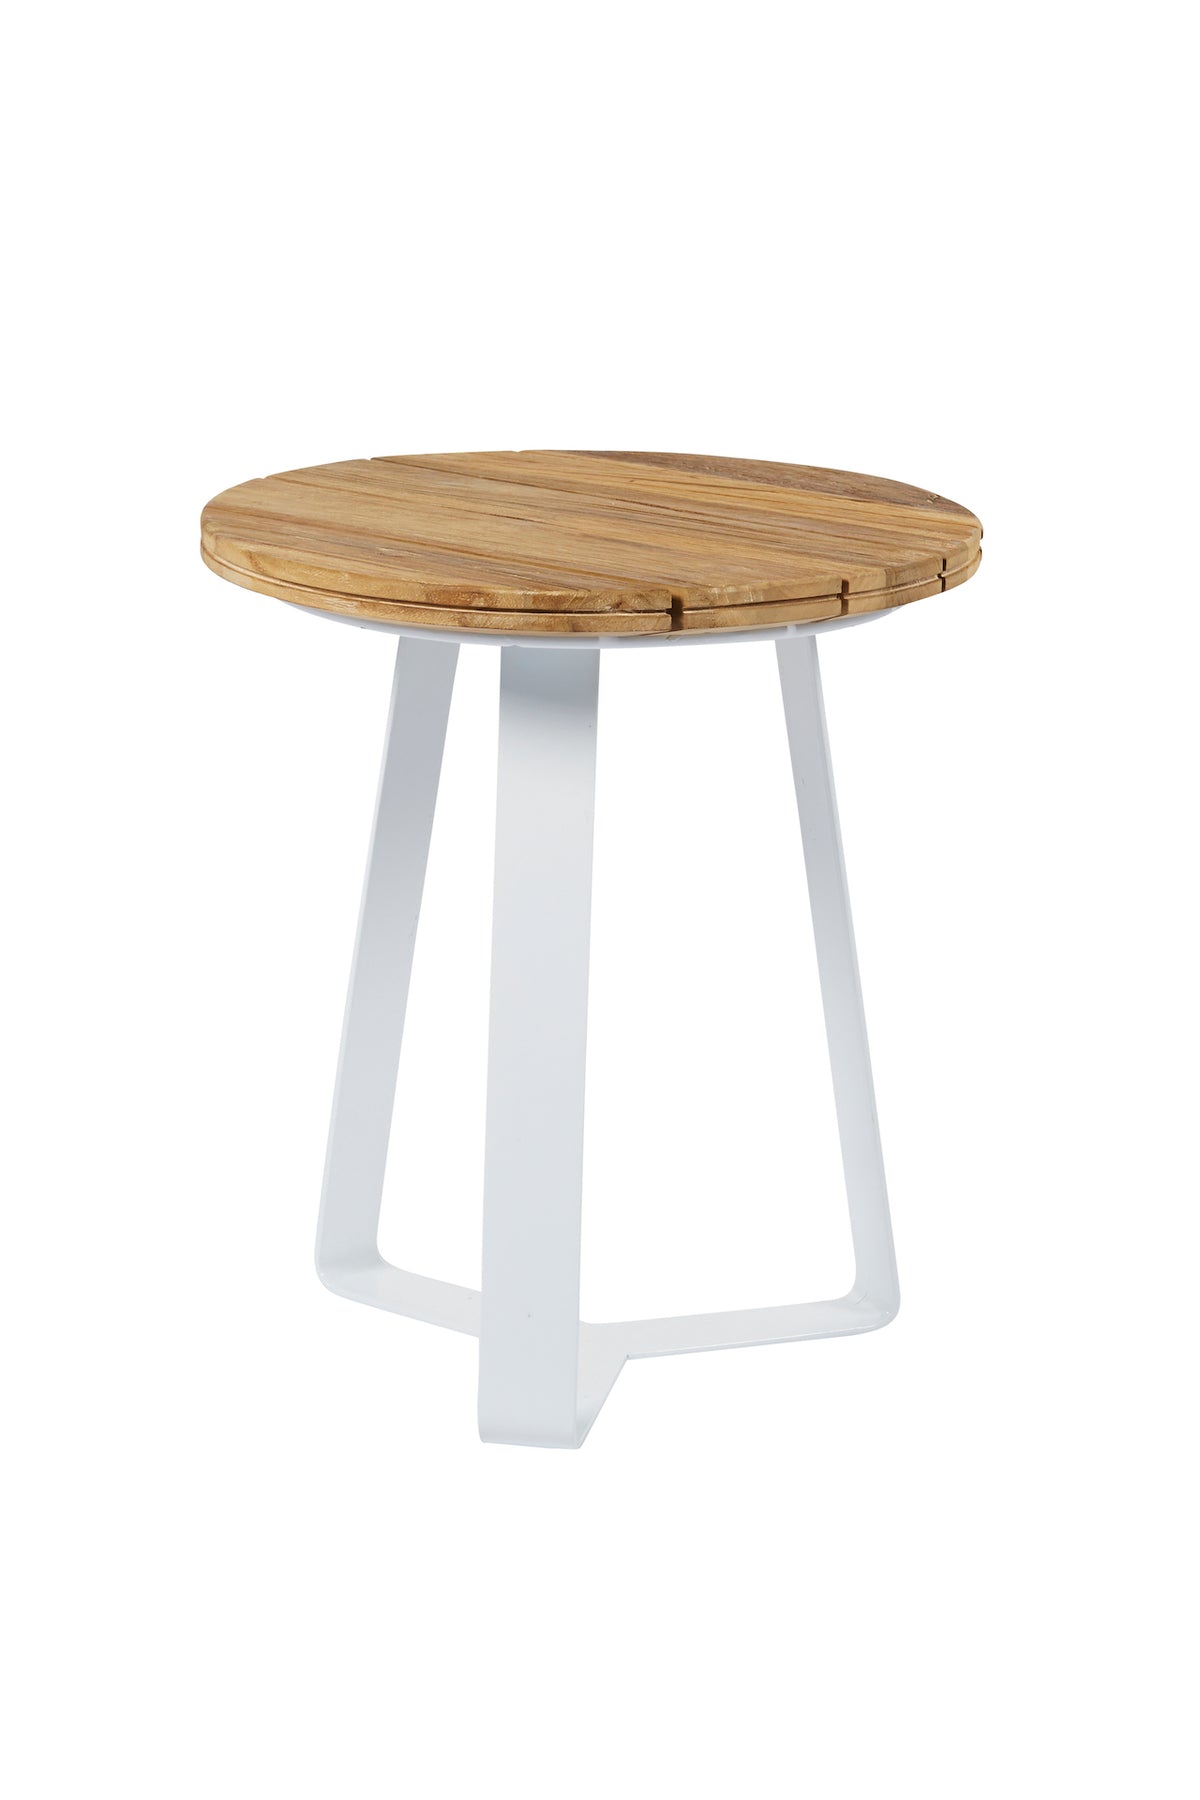 Cancun Ali Small Round Side Table